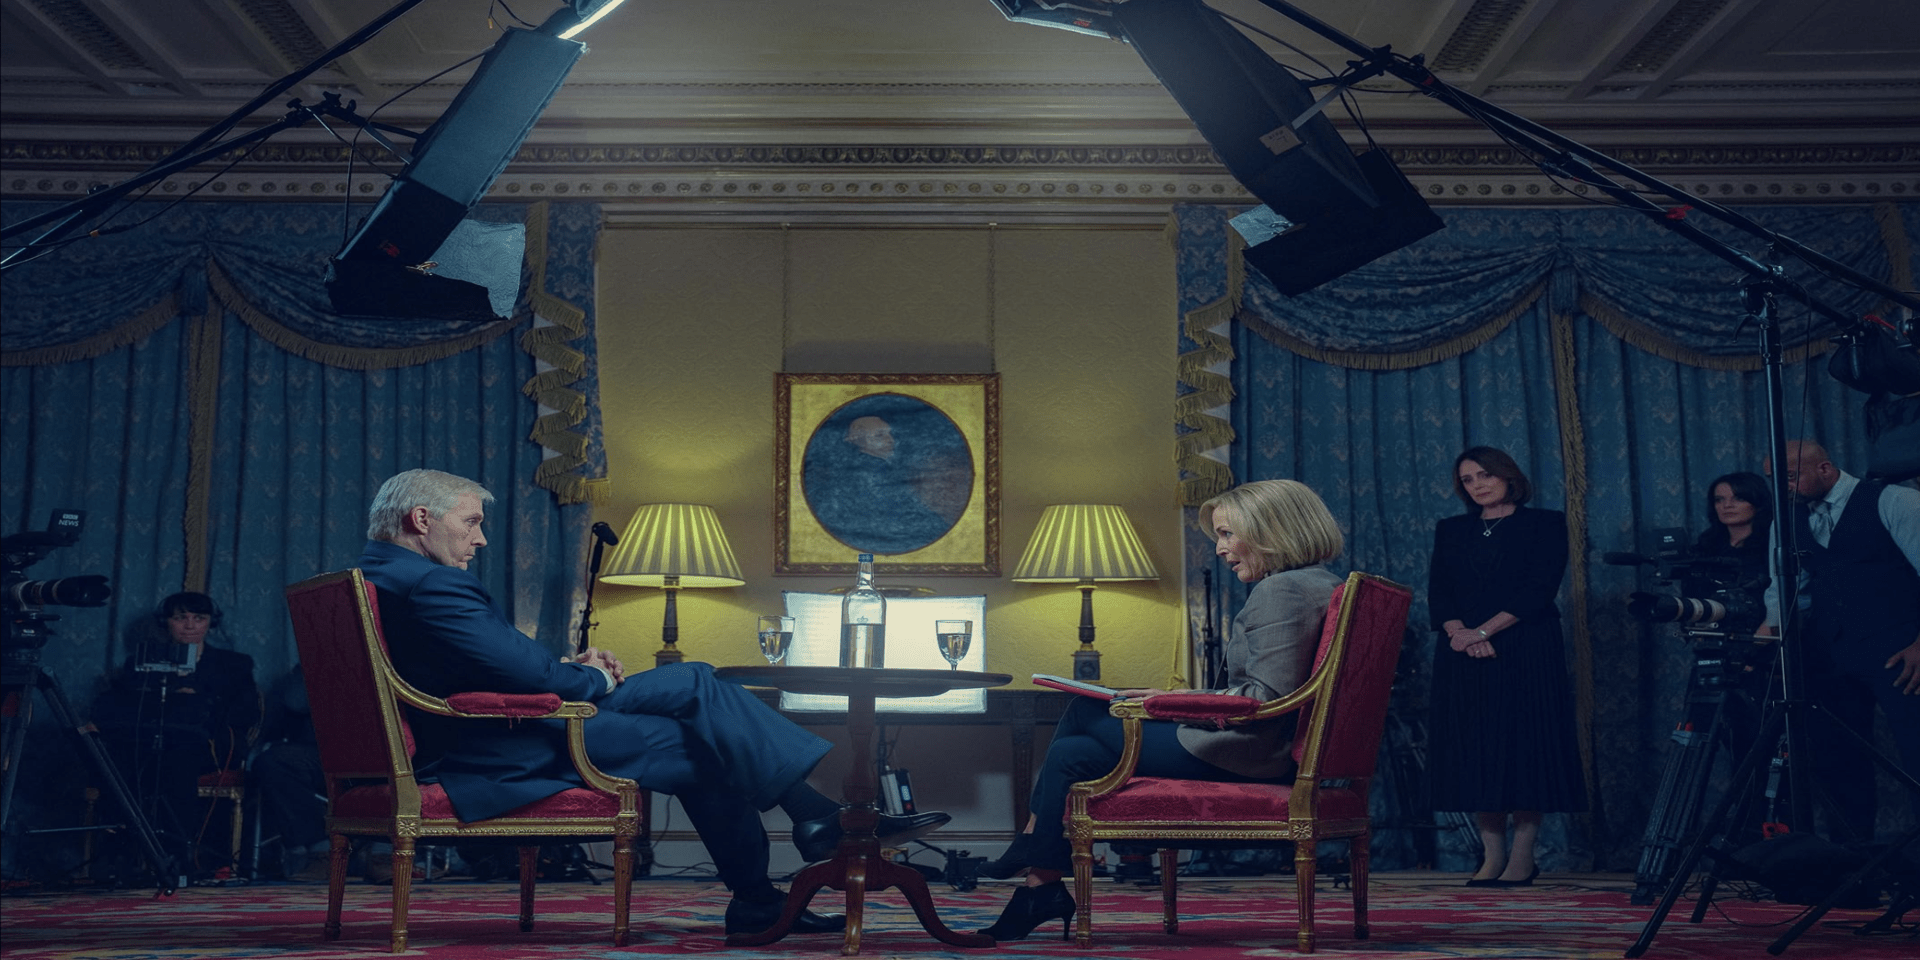 A man in a suit and a female reporter sit in a staged room to film an interview in this image from The Lighthouse.